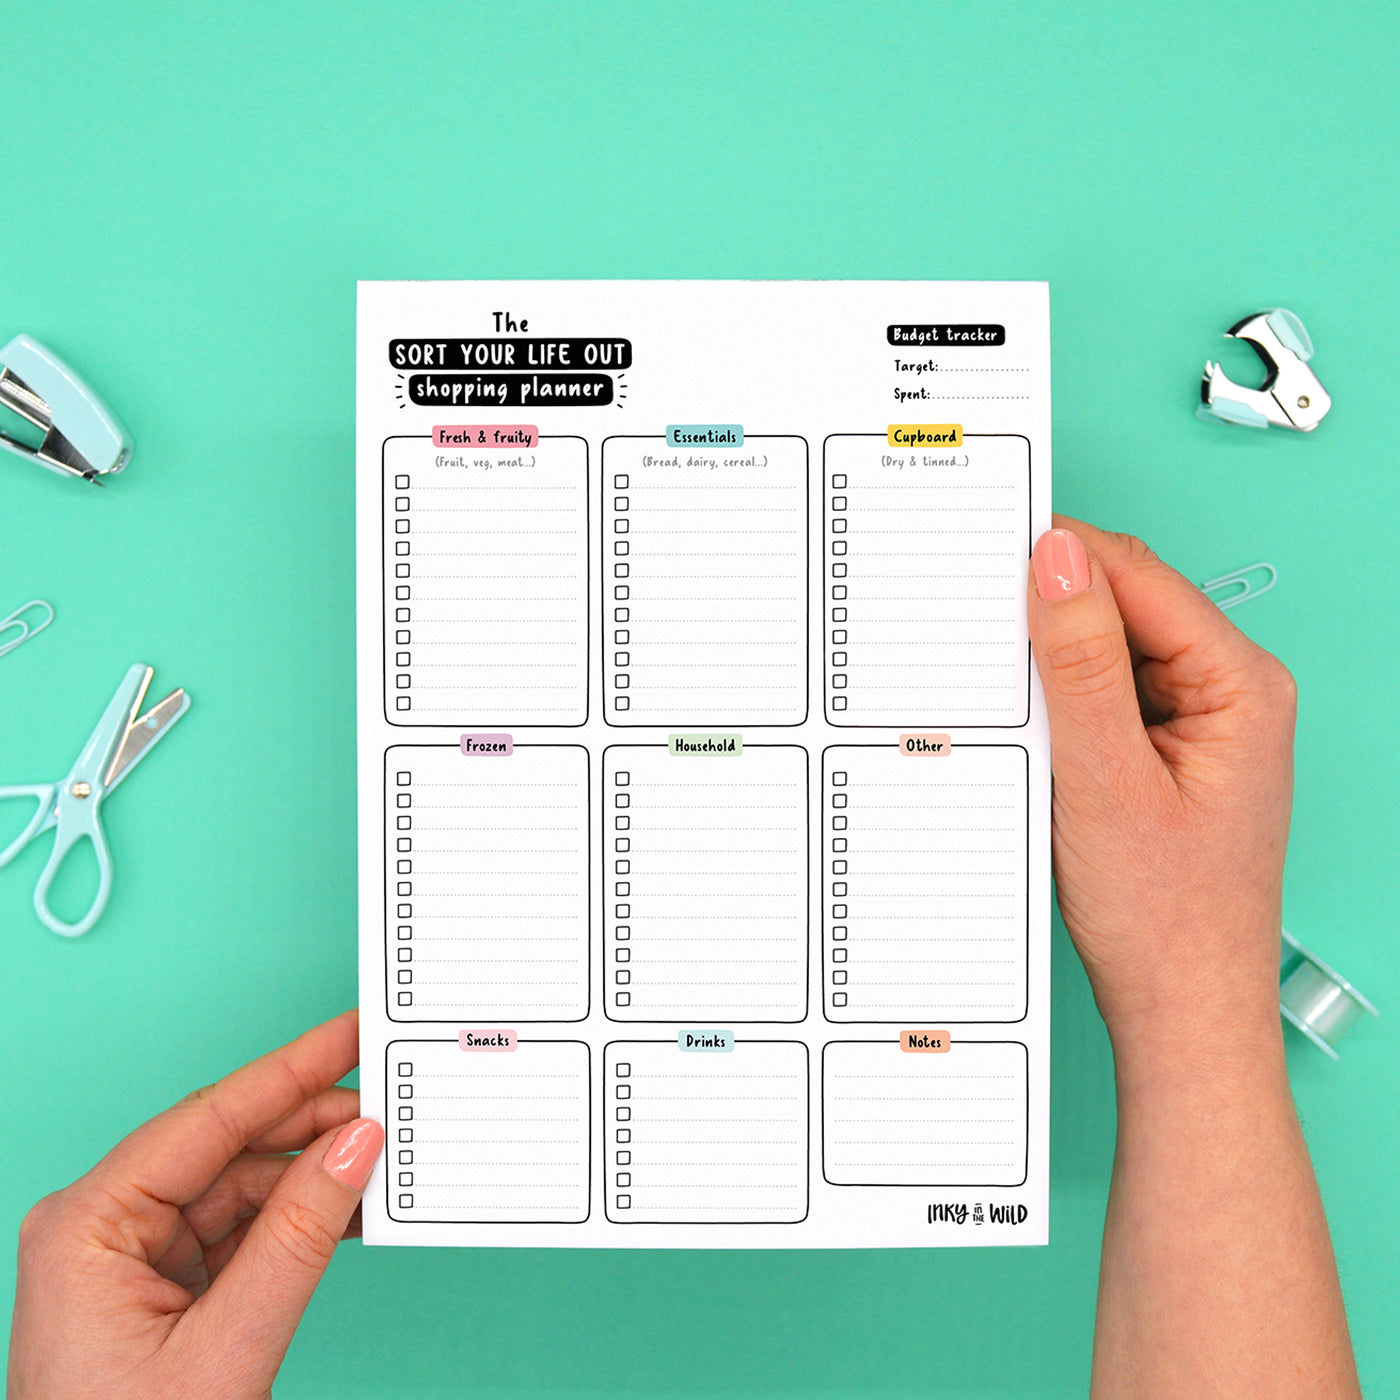 Sort Your Life Out Shopping Planner (A5)